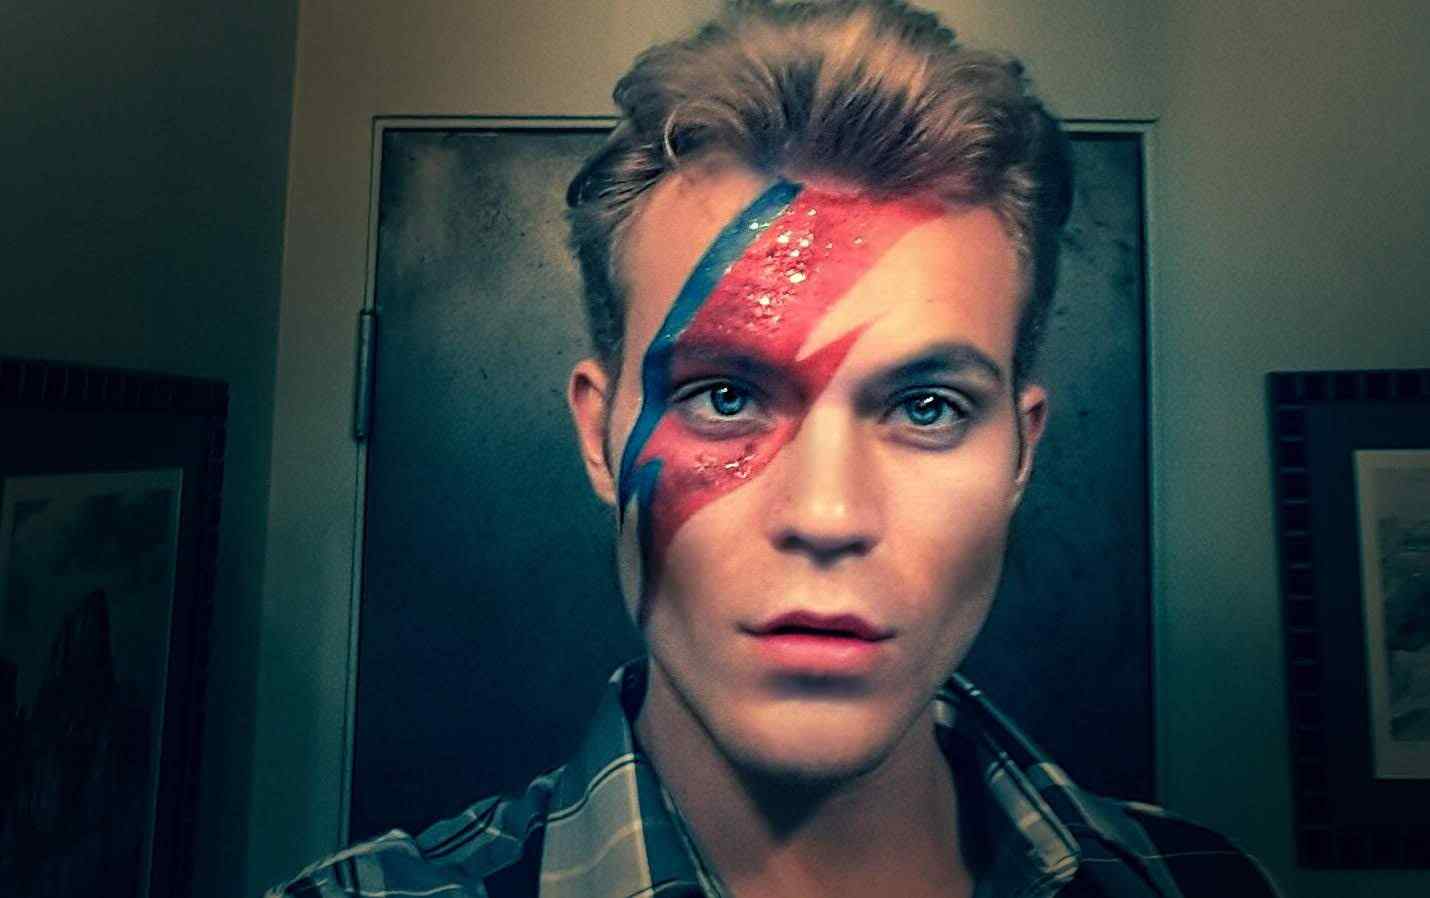 Jonathan Cottrell feeling inspired by David Bowie